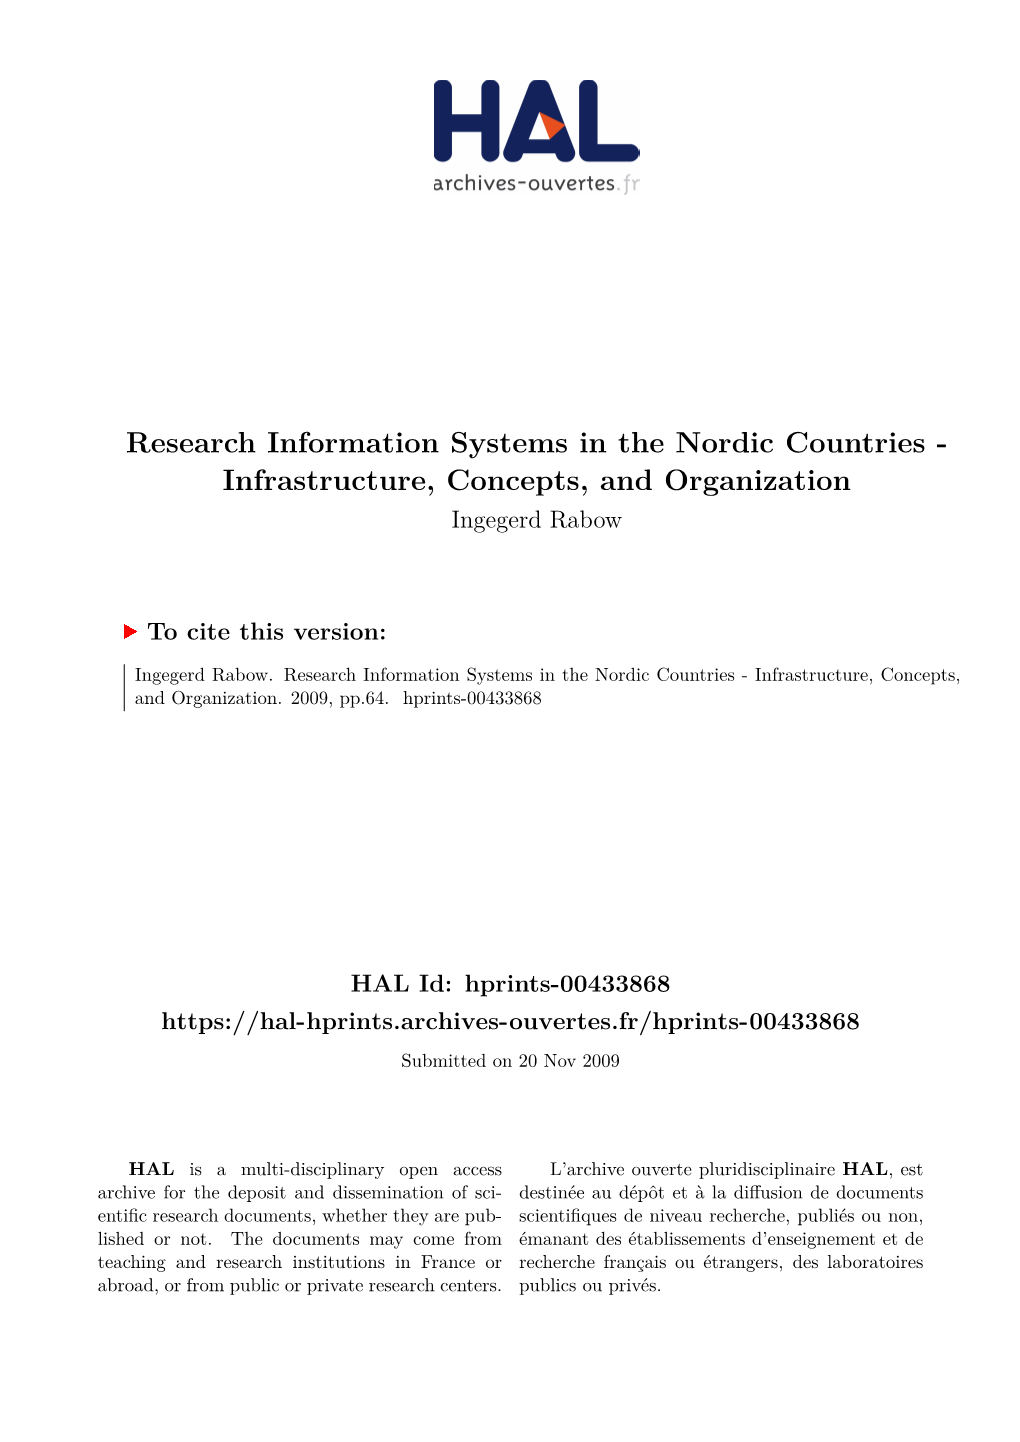 Research Information Systems in the Nordic Countries - Infrastructure, Concepts, and Organization Ingegerd Rabow